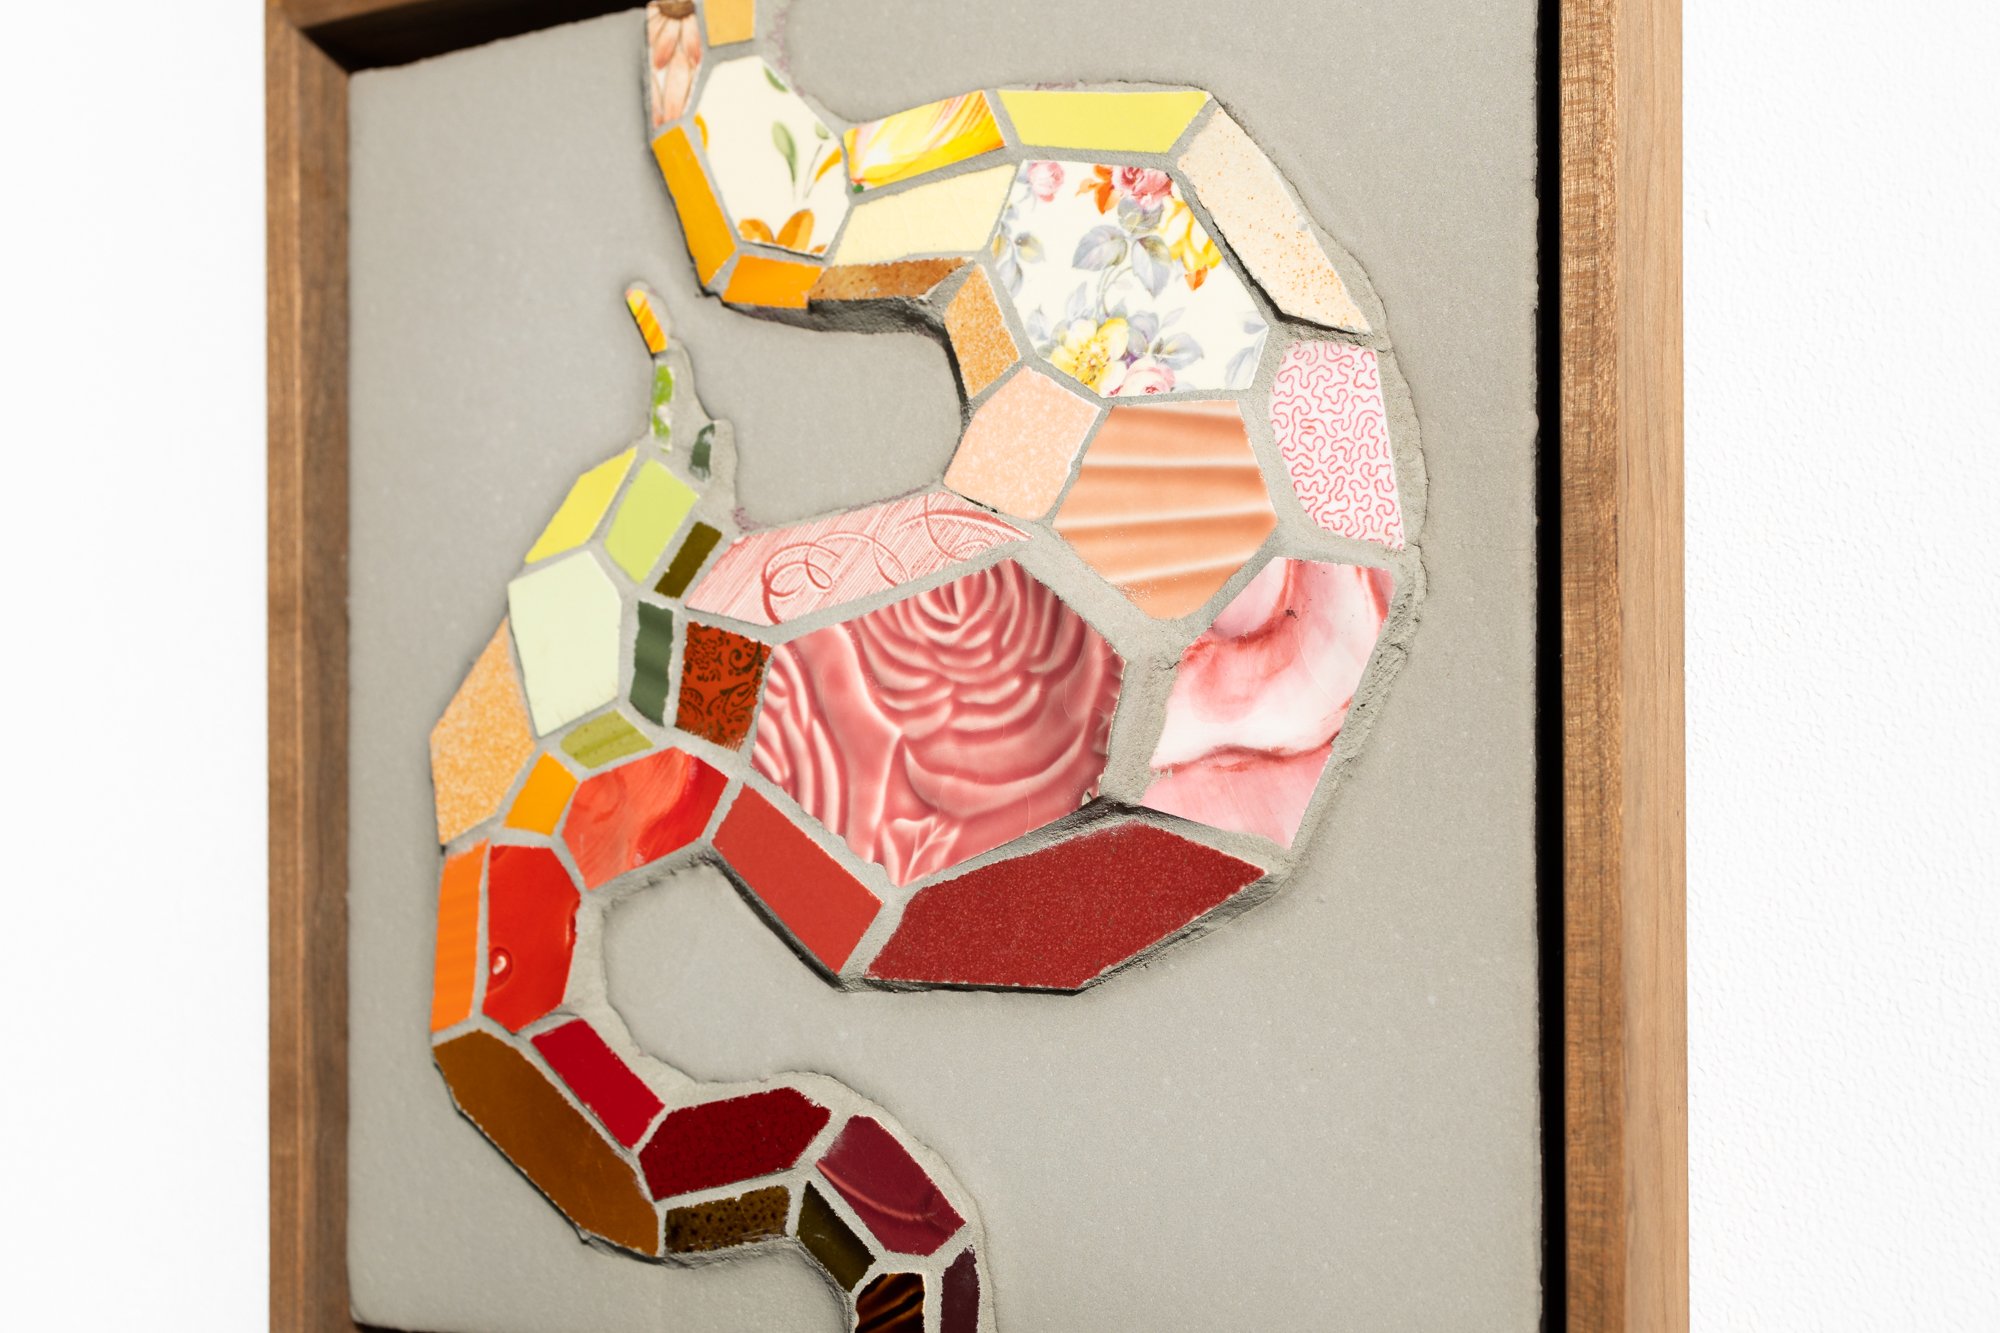 "The Gall" Anatomical Mixed Media Mosaic by Mary Lacy @ Soapbox Arts Gallery, Burlington, Vermont